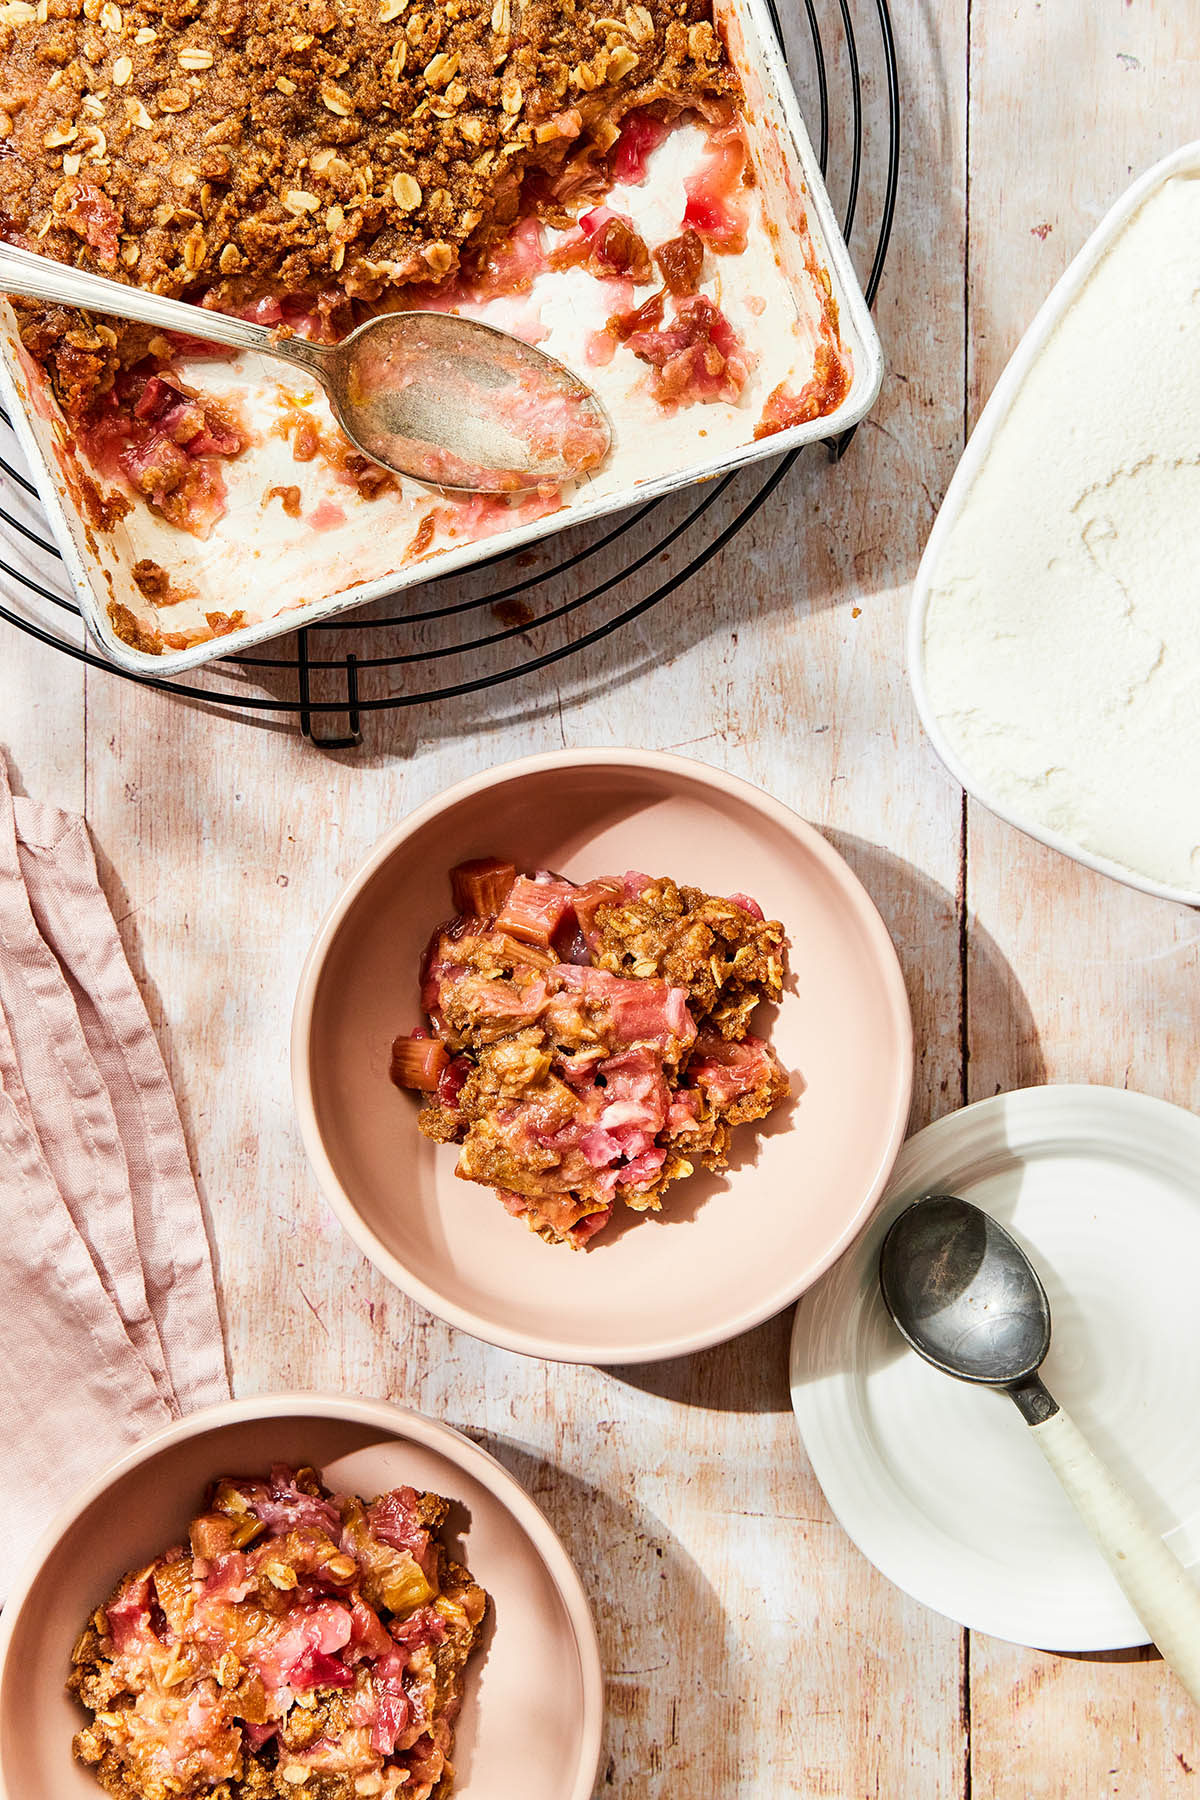 A pan of gluten-free rhubarb crisp on a wood table along with two bowl of crisp, a carton of un-scooped ice cream and an ice cream scoop.